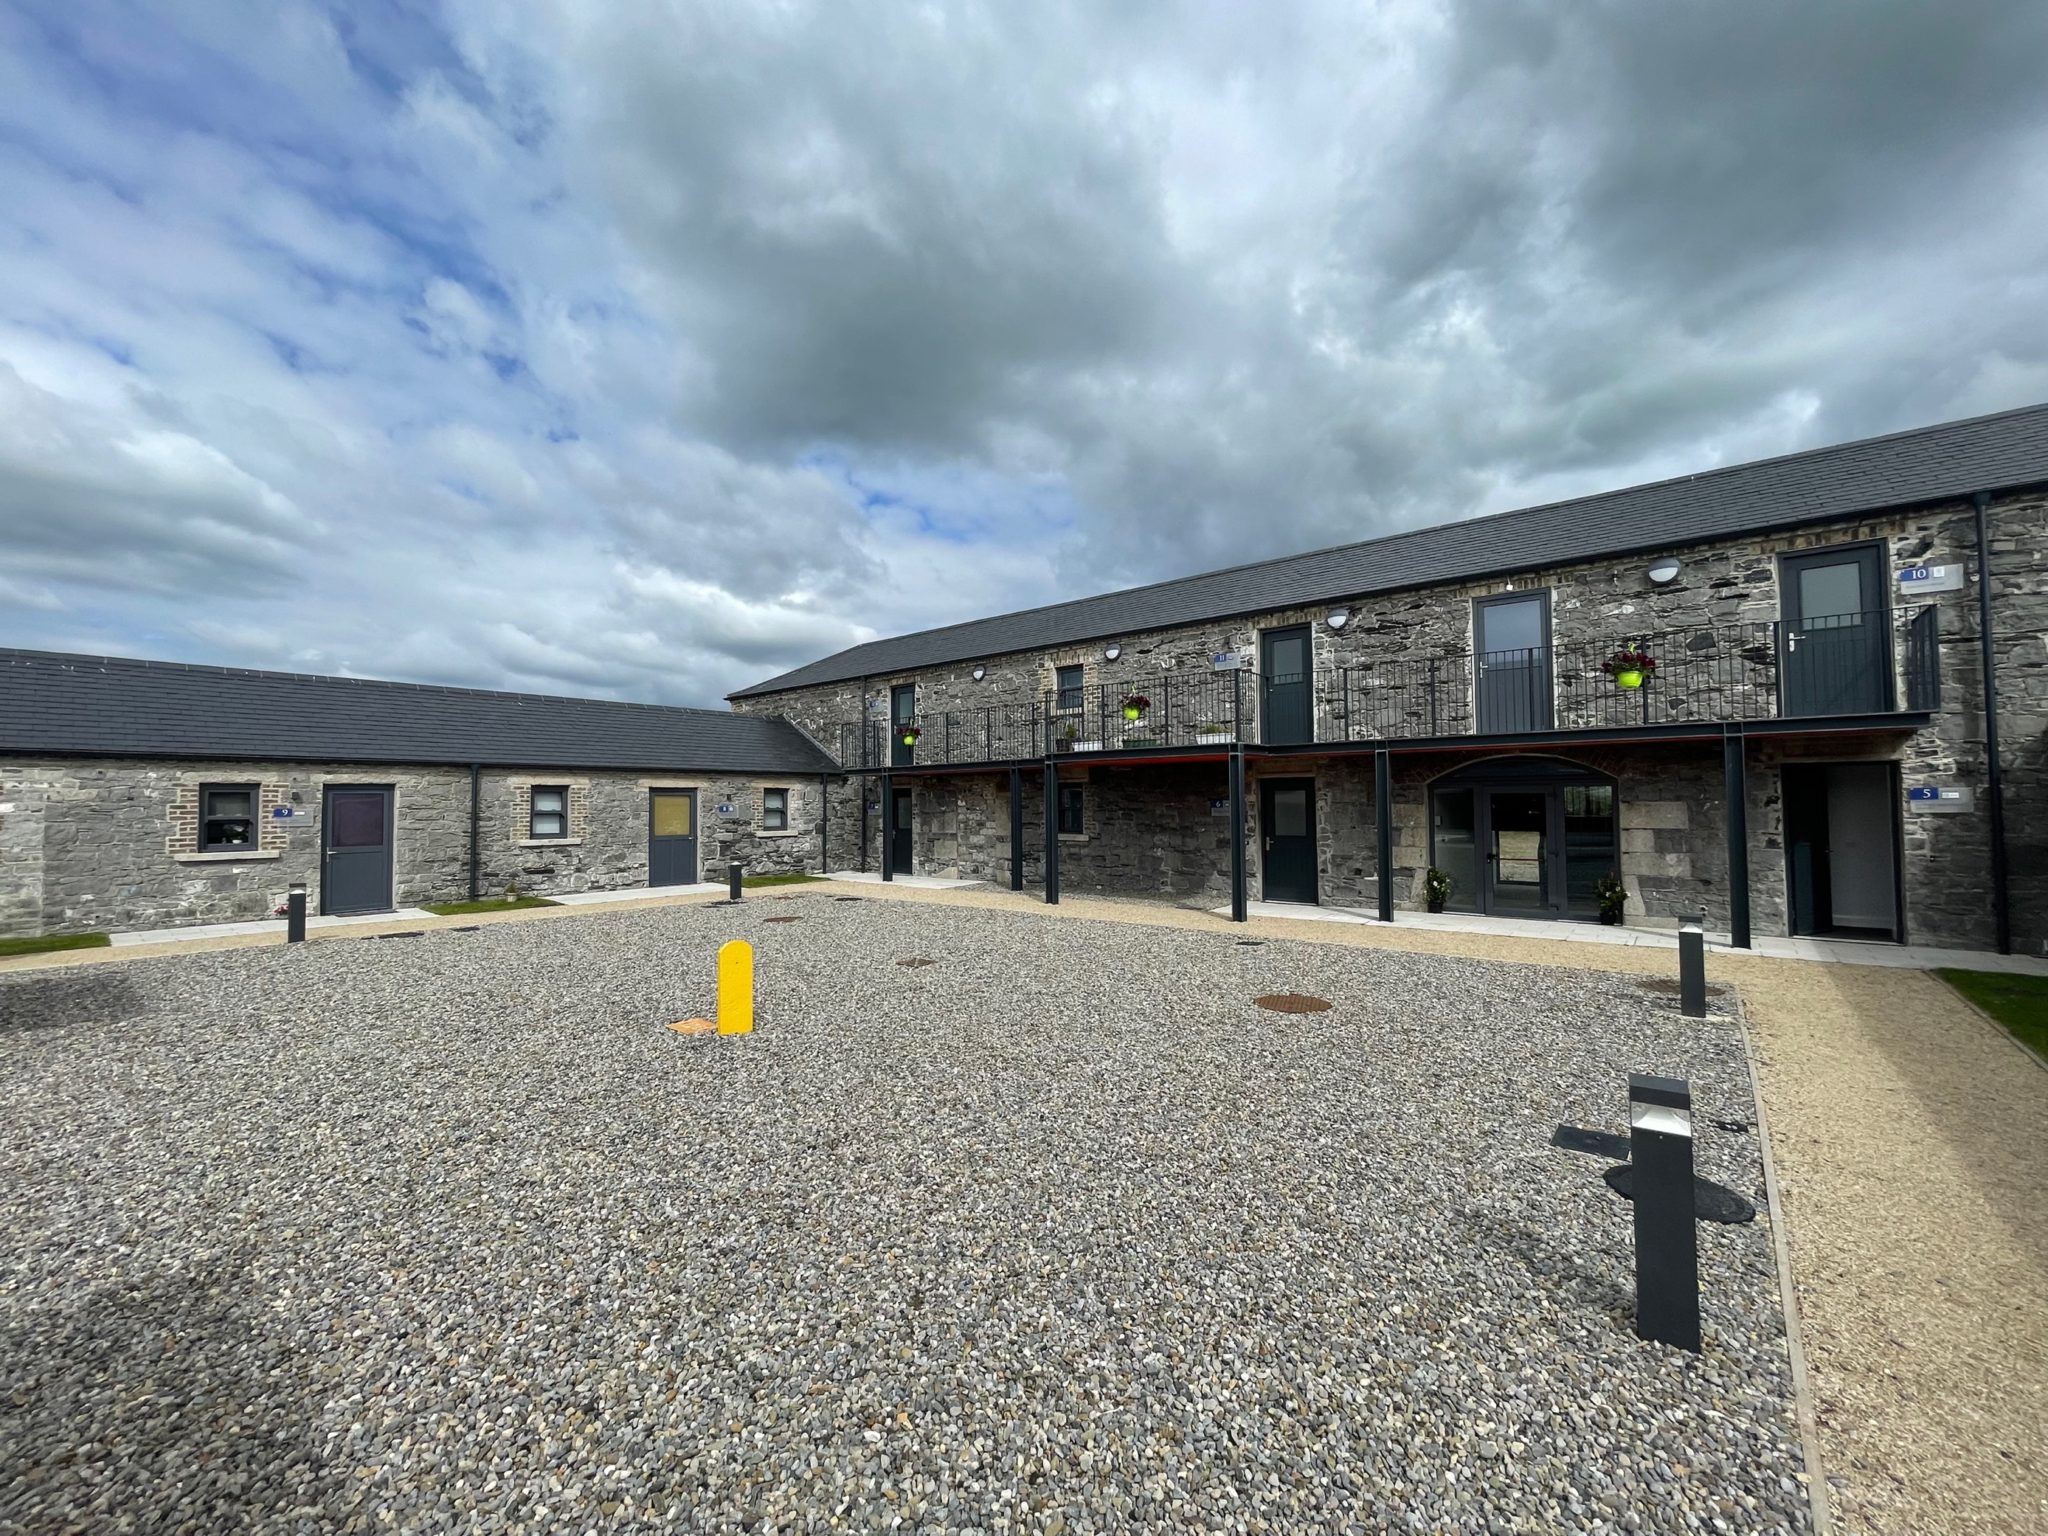 The homeless centre for young adults in Naas opened by President Michael D. Higgins this afternoon, 14-06-2022. Image: Barry Whyte/Newstalk